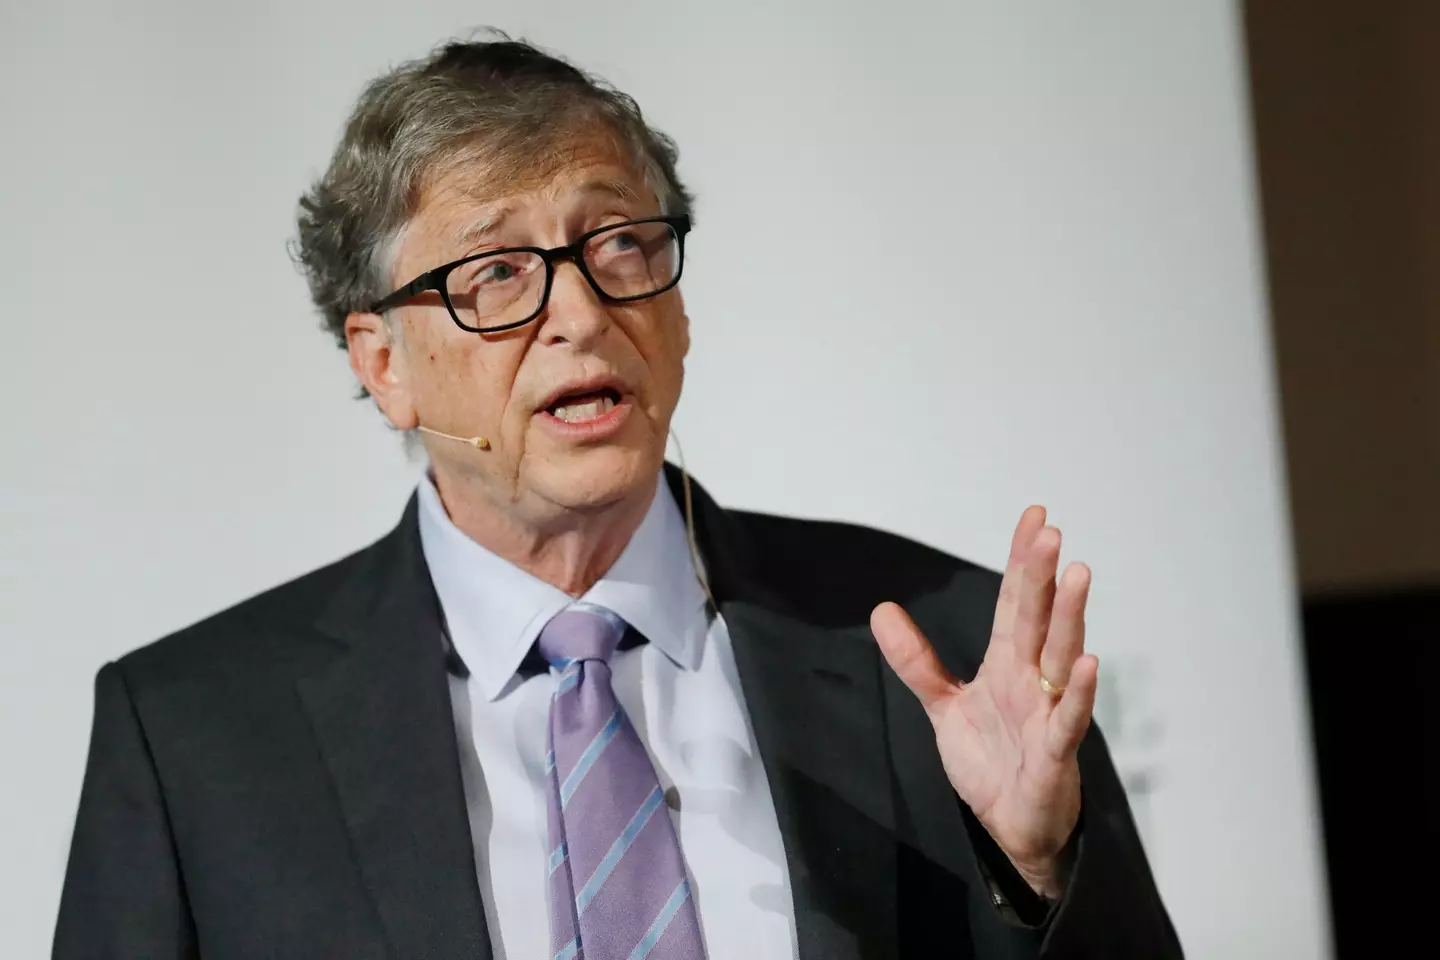 Bill Gates has been a vocal advocate for initiatives that help combat climate change.